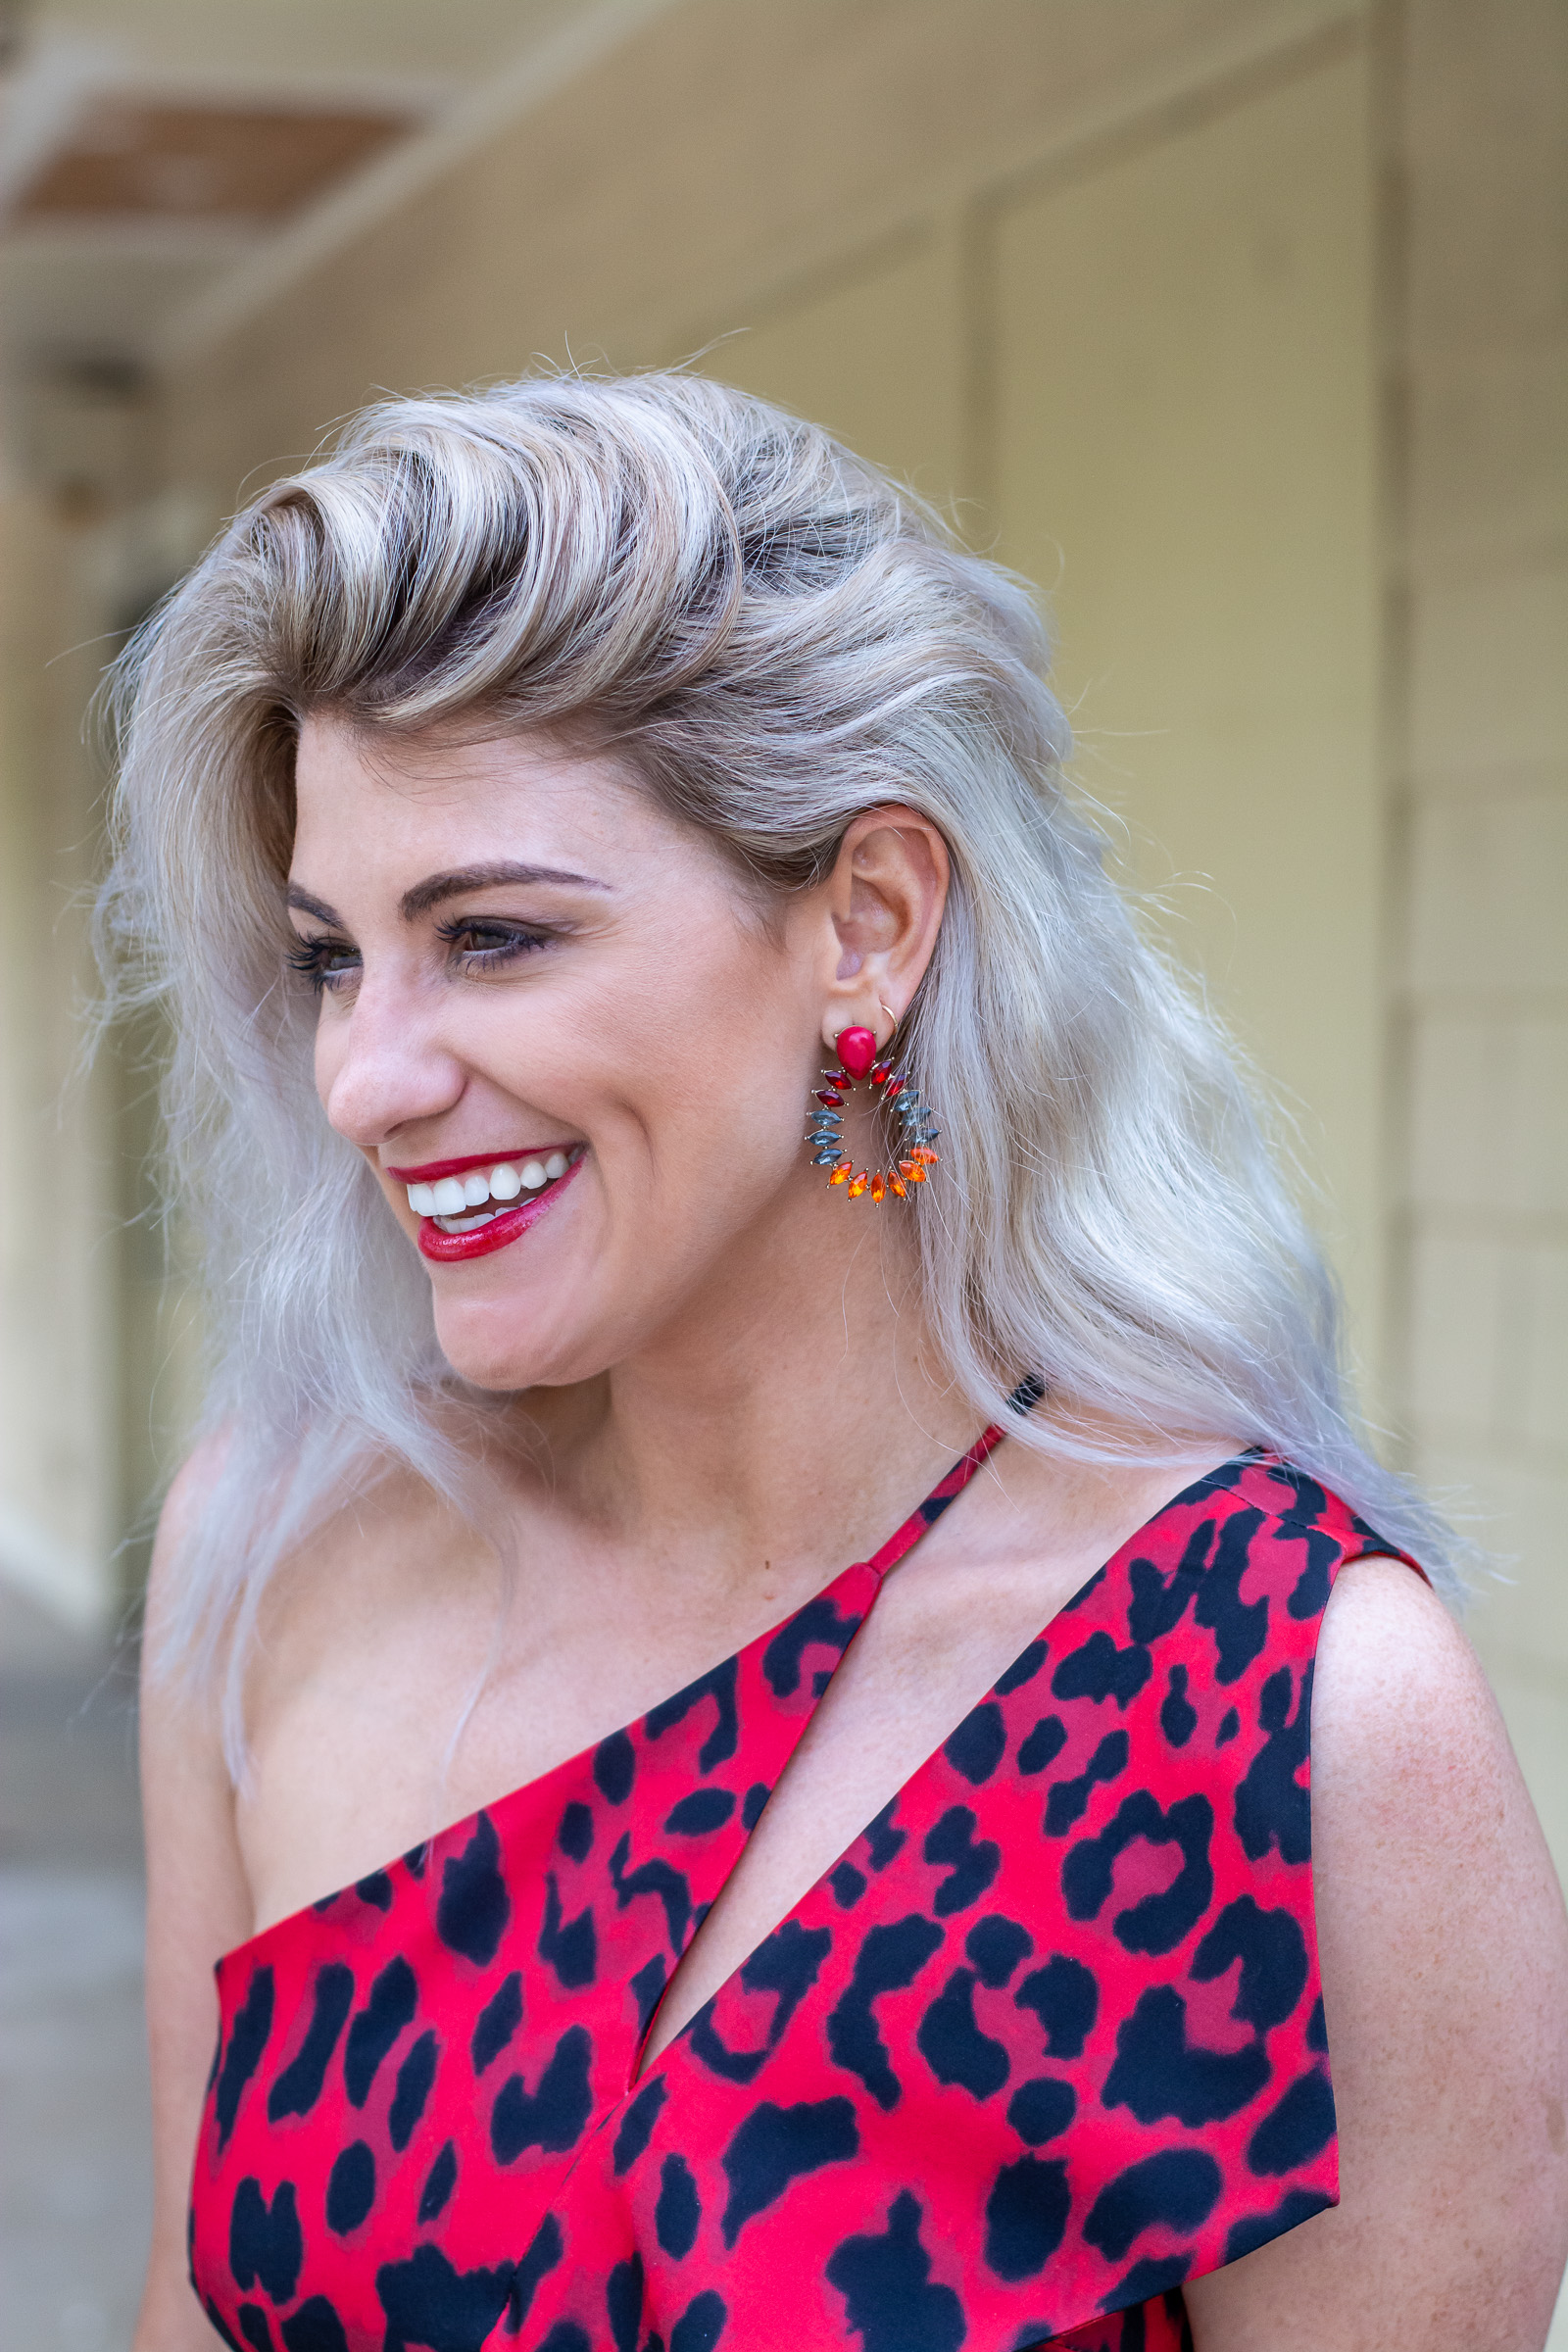 Statement Earrings and Red Leopard Dress. | LSR